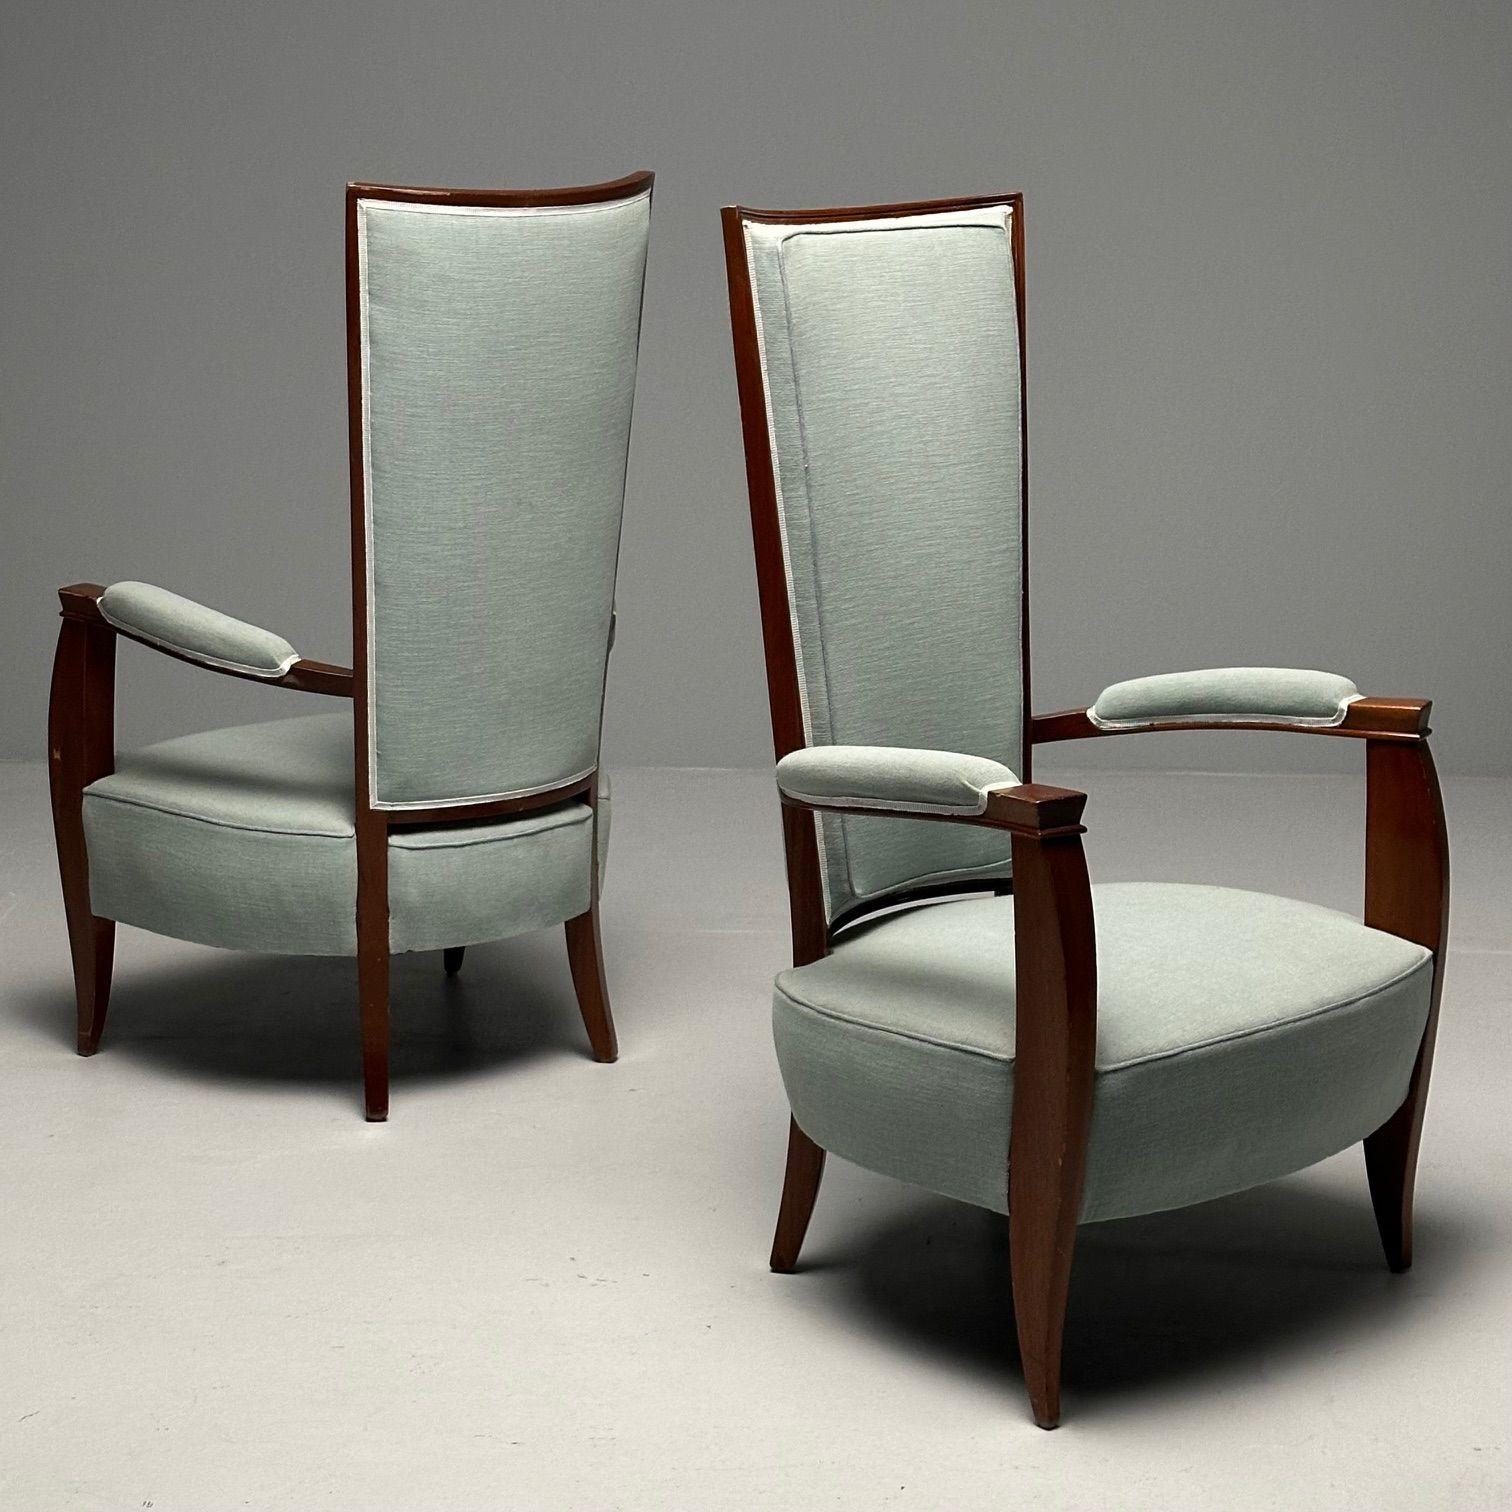 French Art Deco, High-Back Chairs, Mahogany, Turqoise Linen, France, 1970s In Good Condition For Sale In Stamford, CT